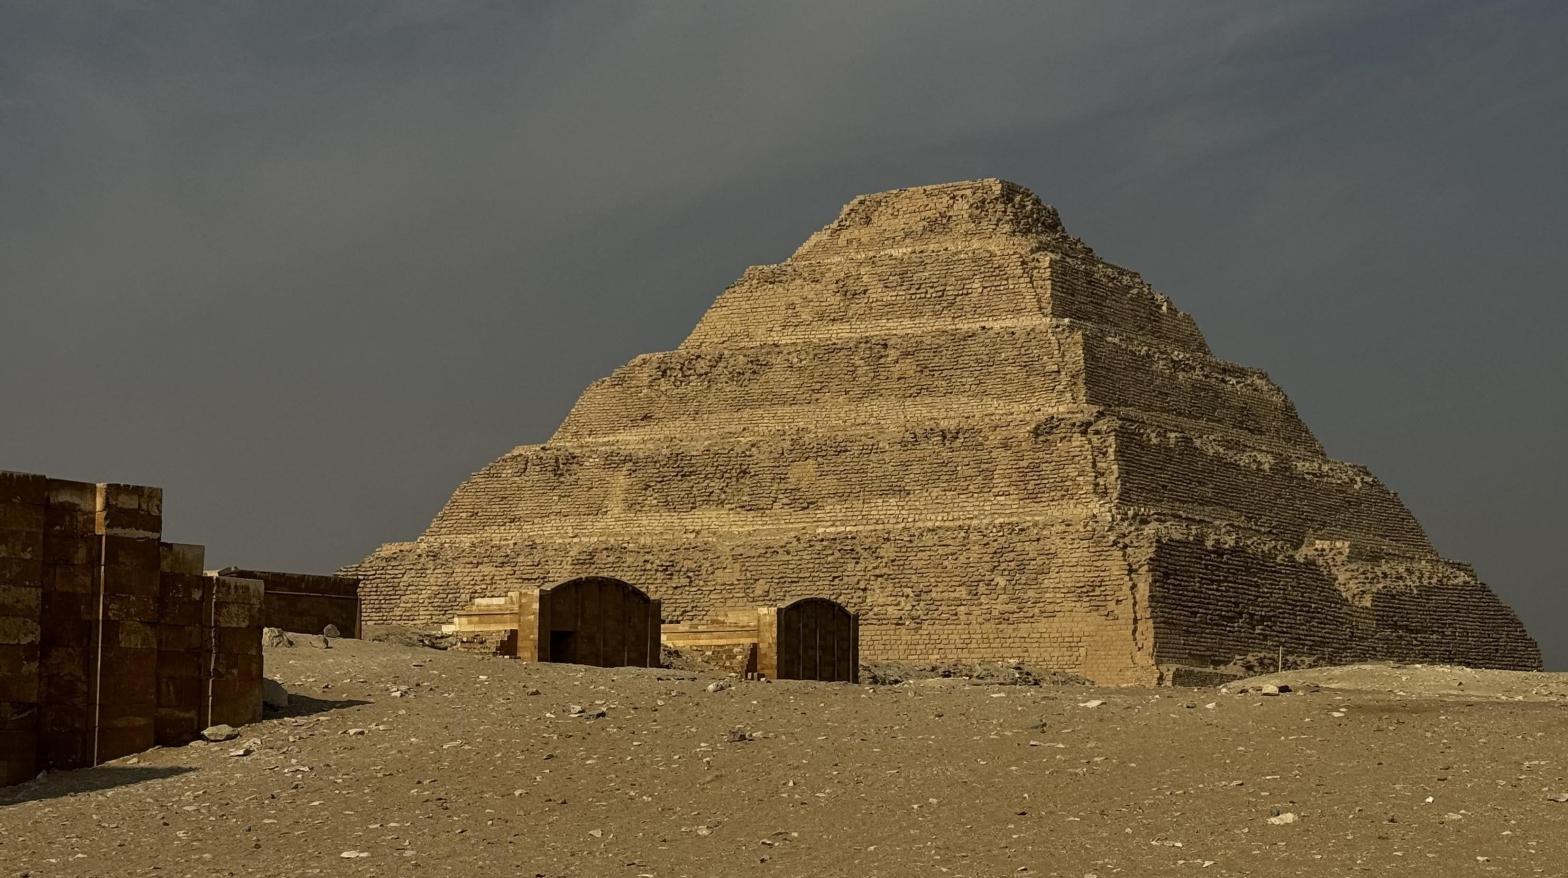 Egypt’s Pyramids May Have Been Built on a Long-Lost Branch of the Nile River